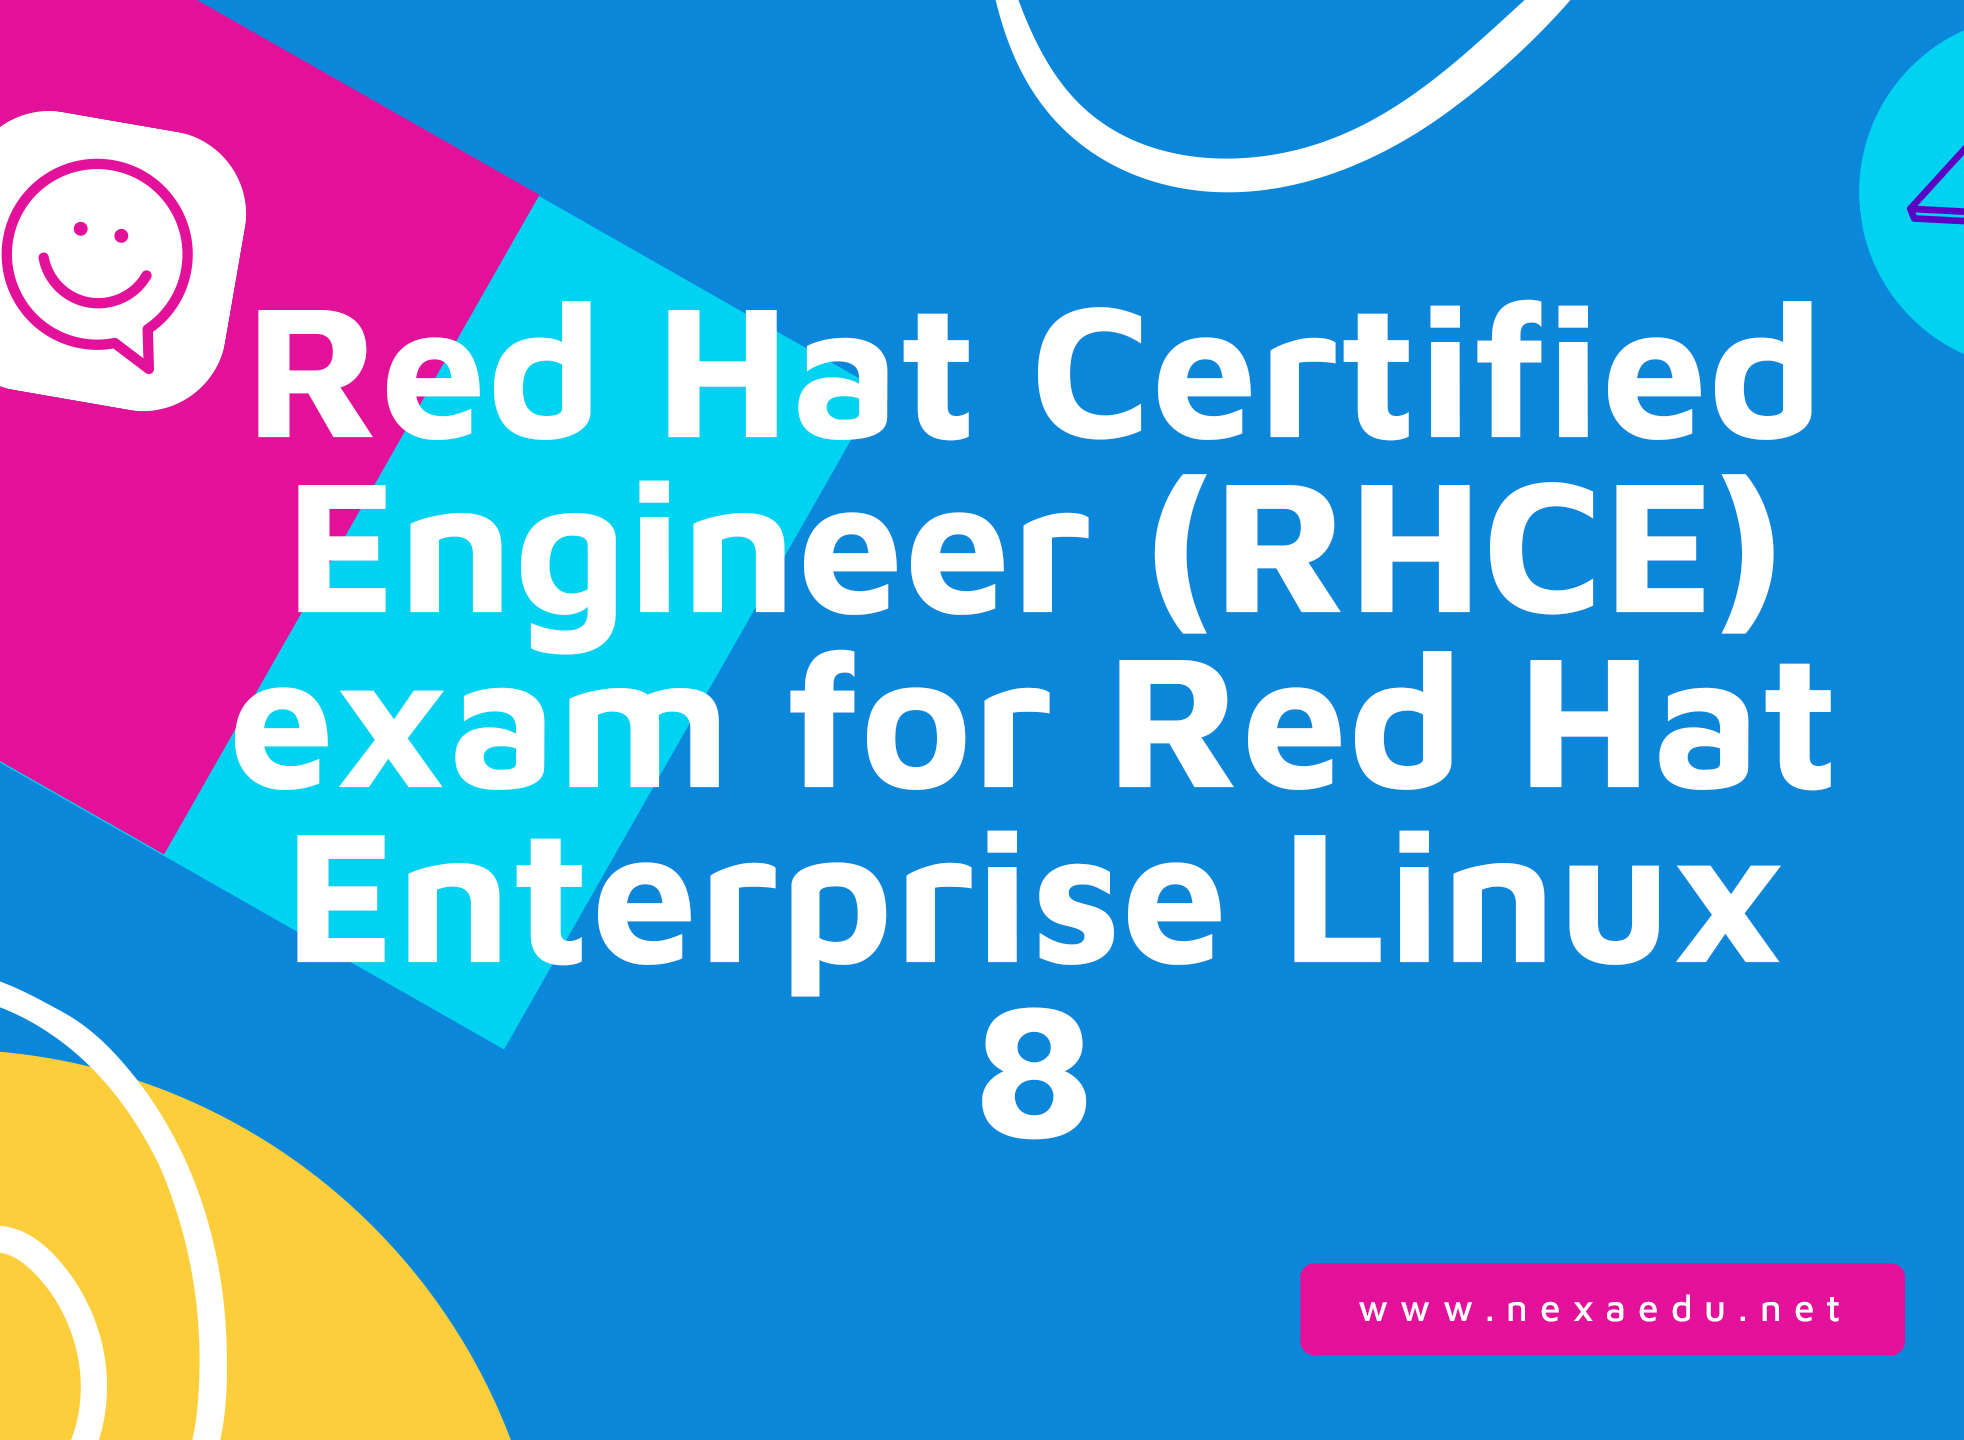 Red Hat Certified Engineer (RHCE) exam for Red Hat Enterprise Linux 8